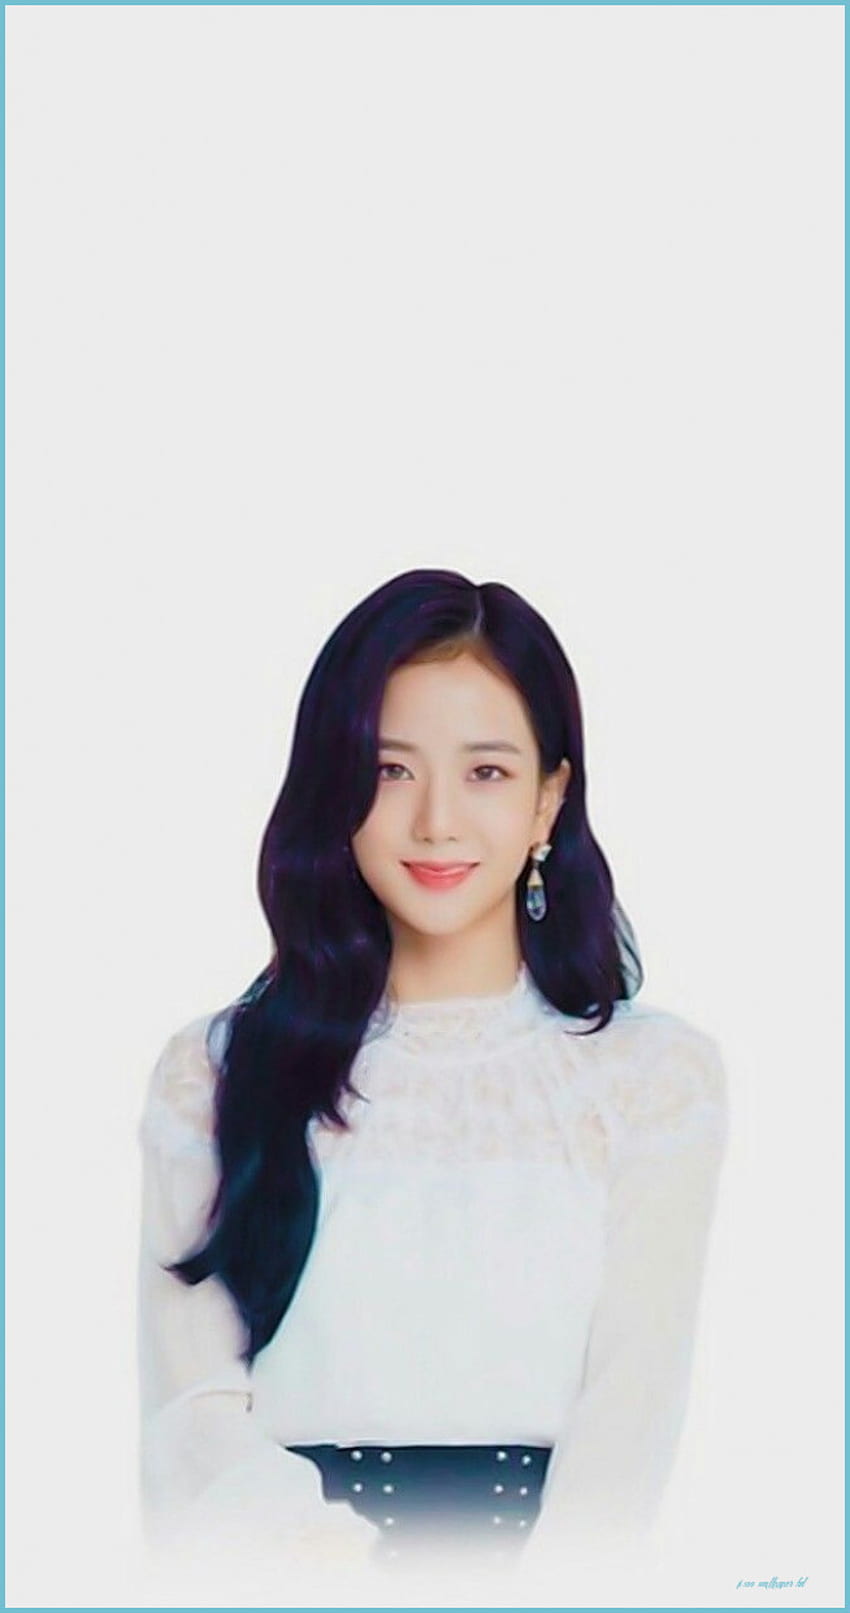 2048x2048 Jisoo Blackpink 4k Ipad Air HD 4k Wallpapers Images  Backgrounds Photos and Pictures